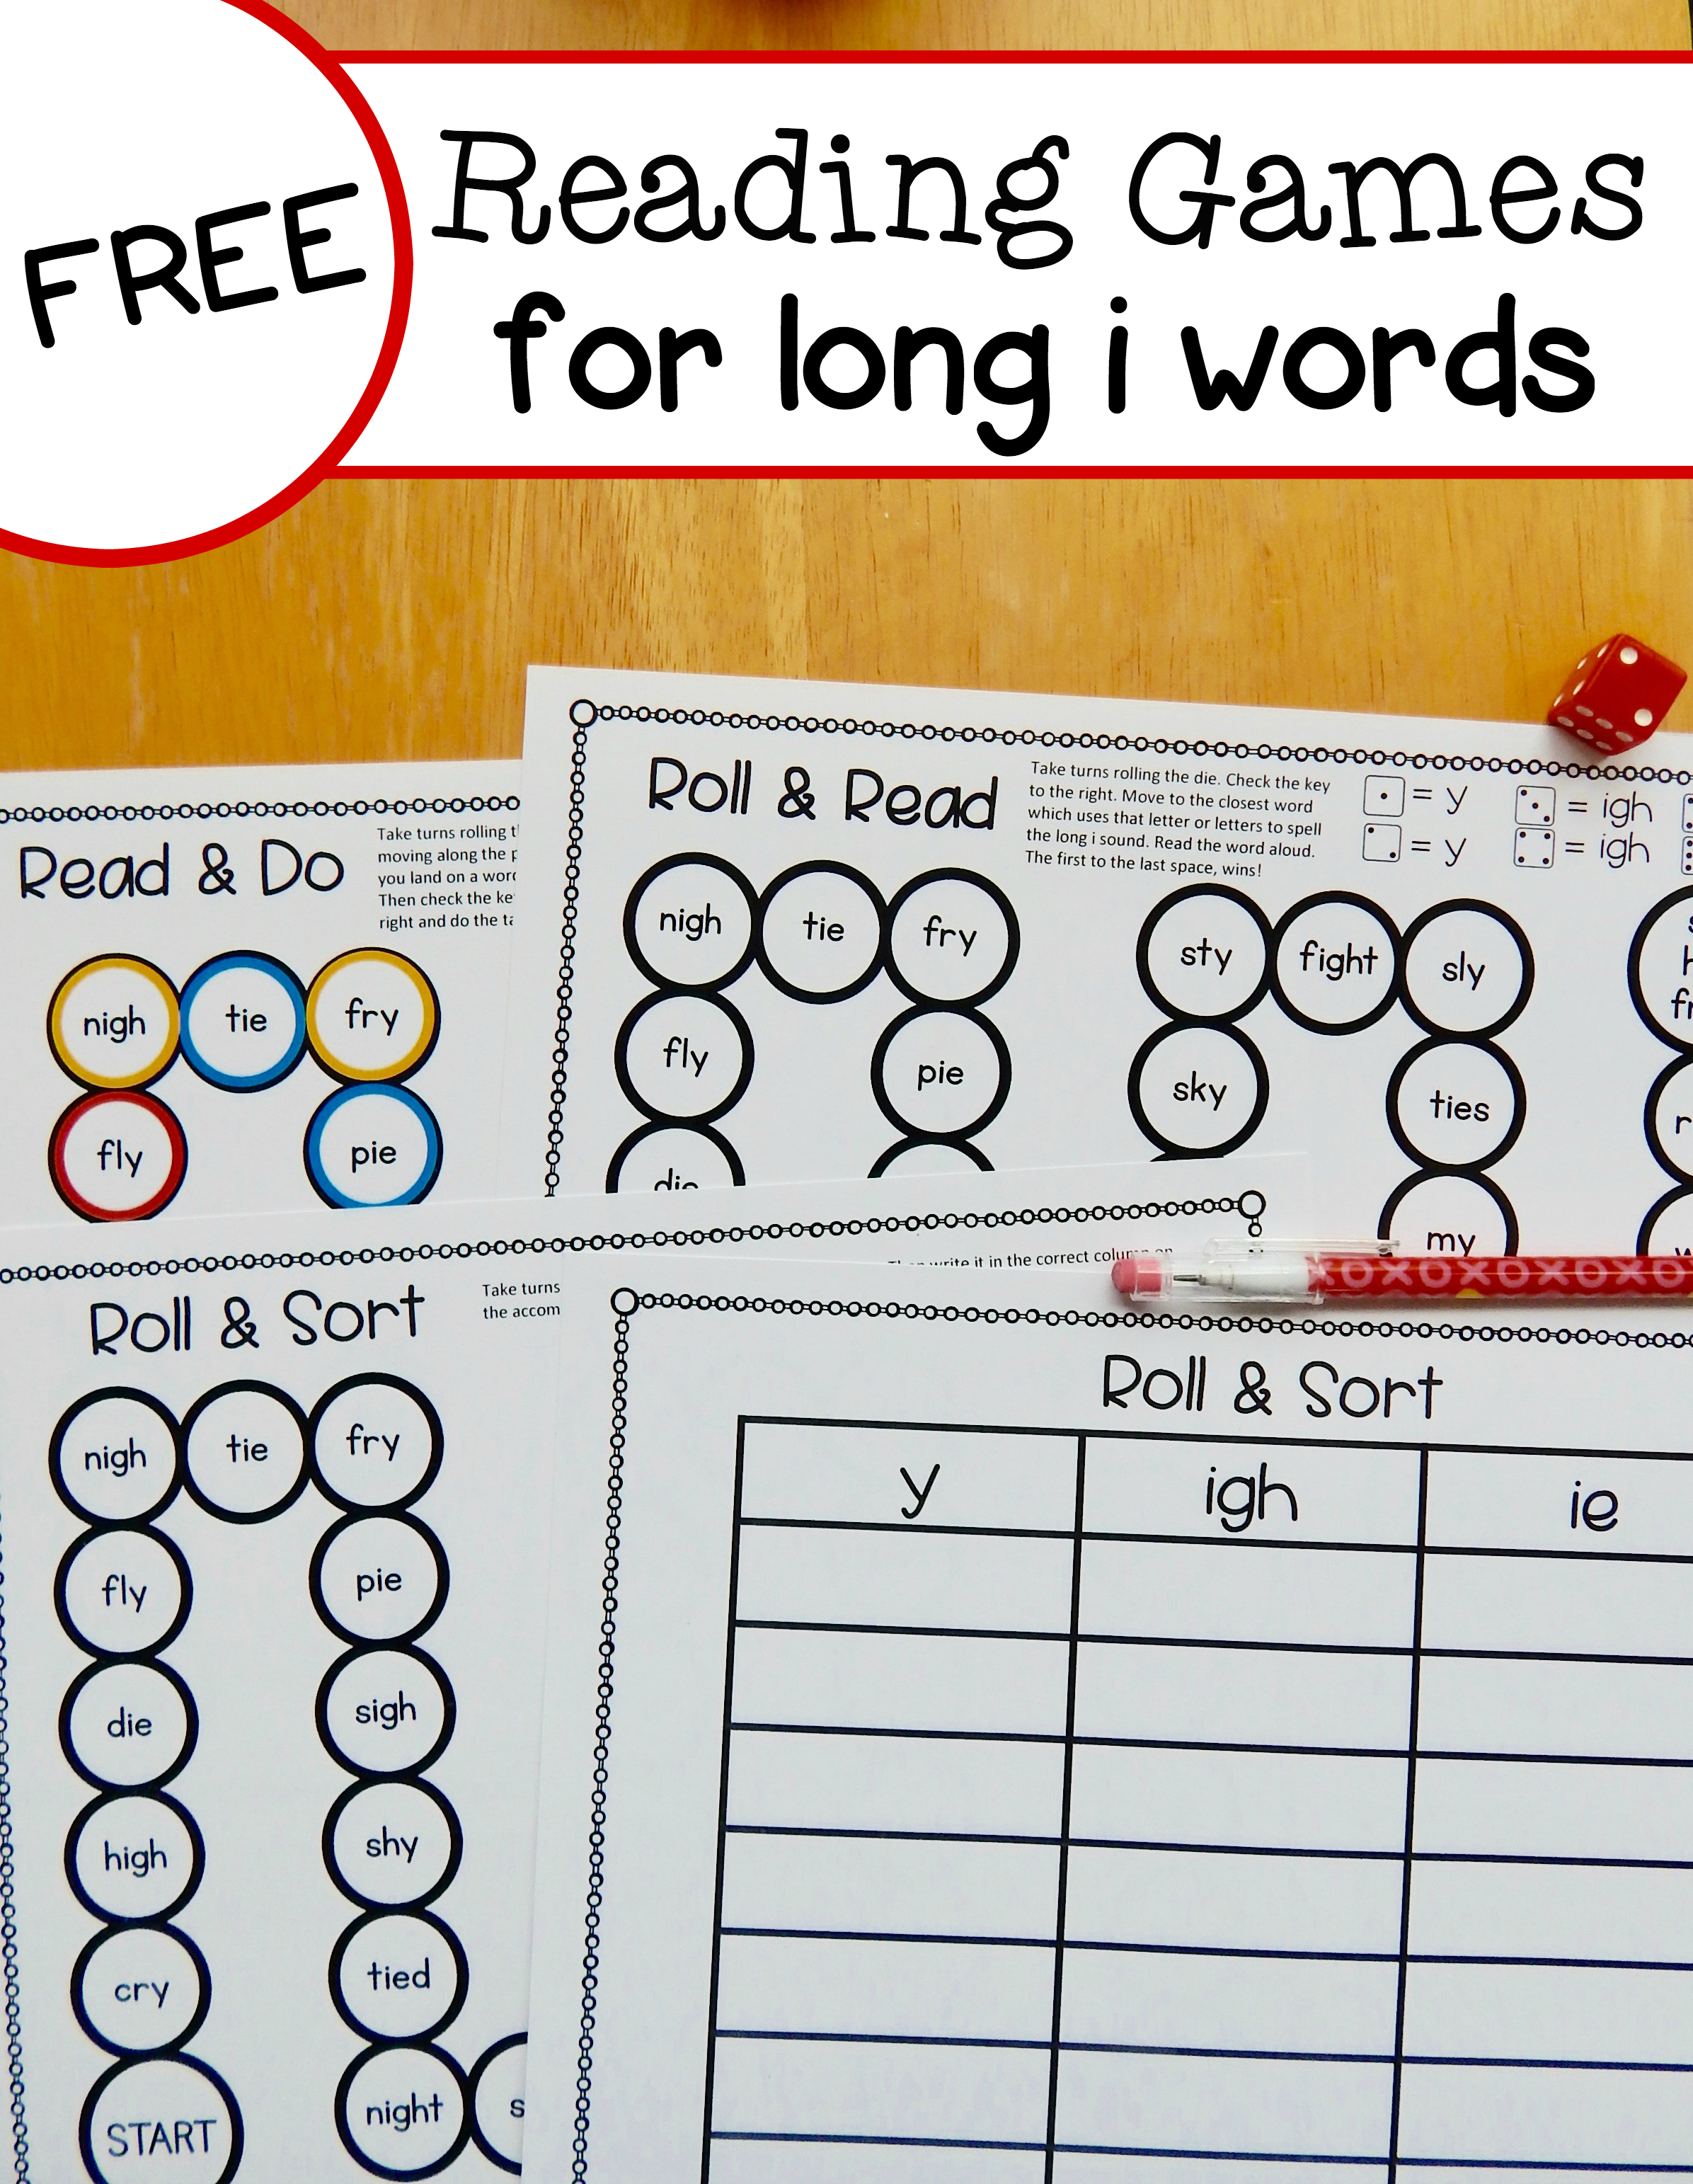 Free Long I Reading Games For Y, Ie, And Igh Words - The Measured Mom - My Spelling Dictionary Printable Free